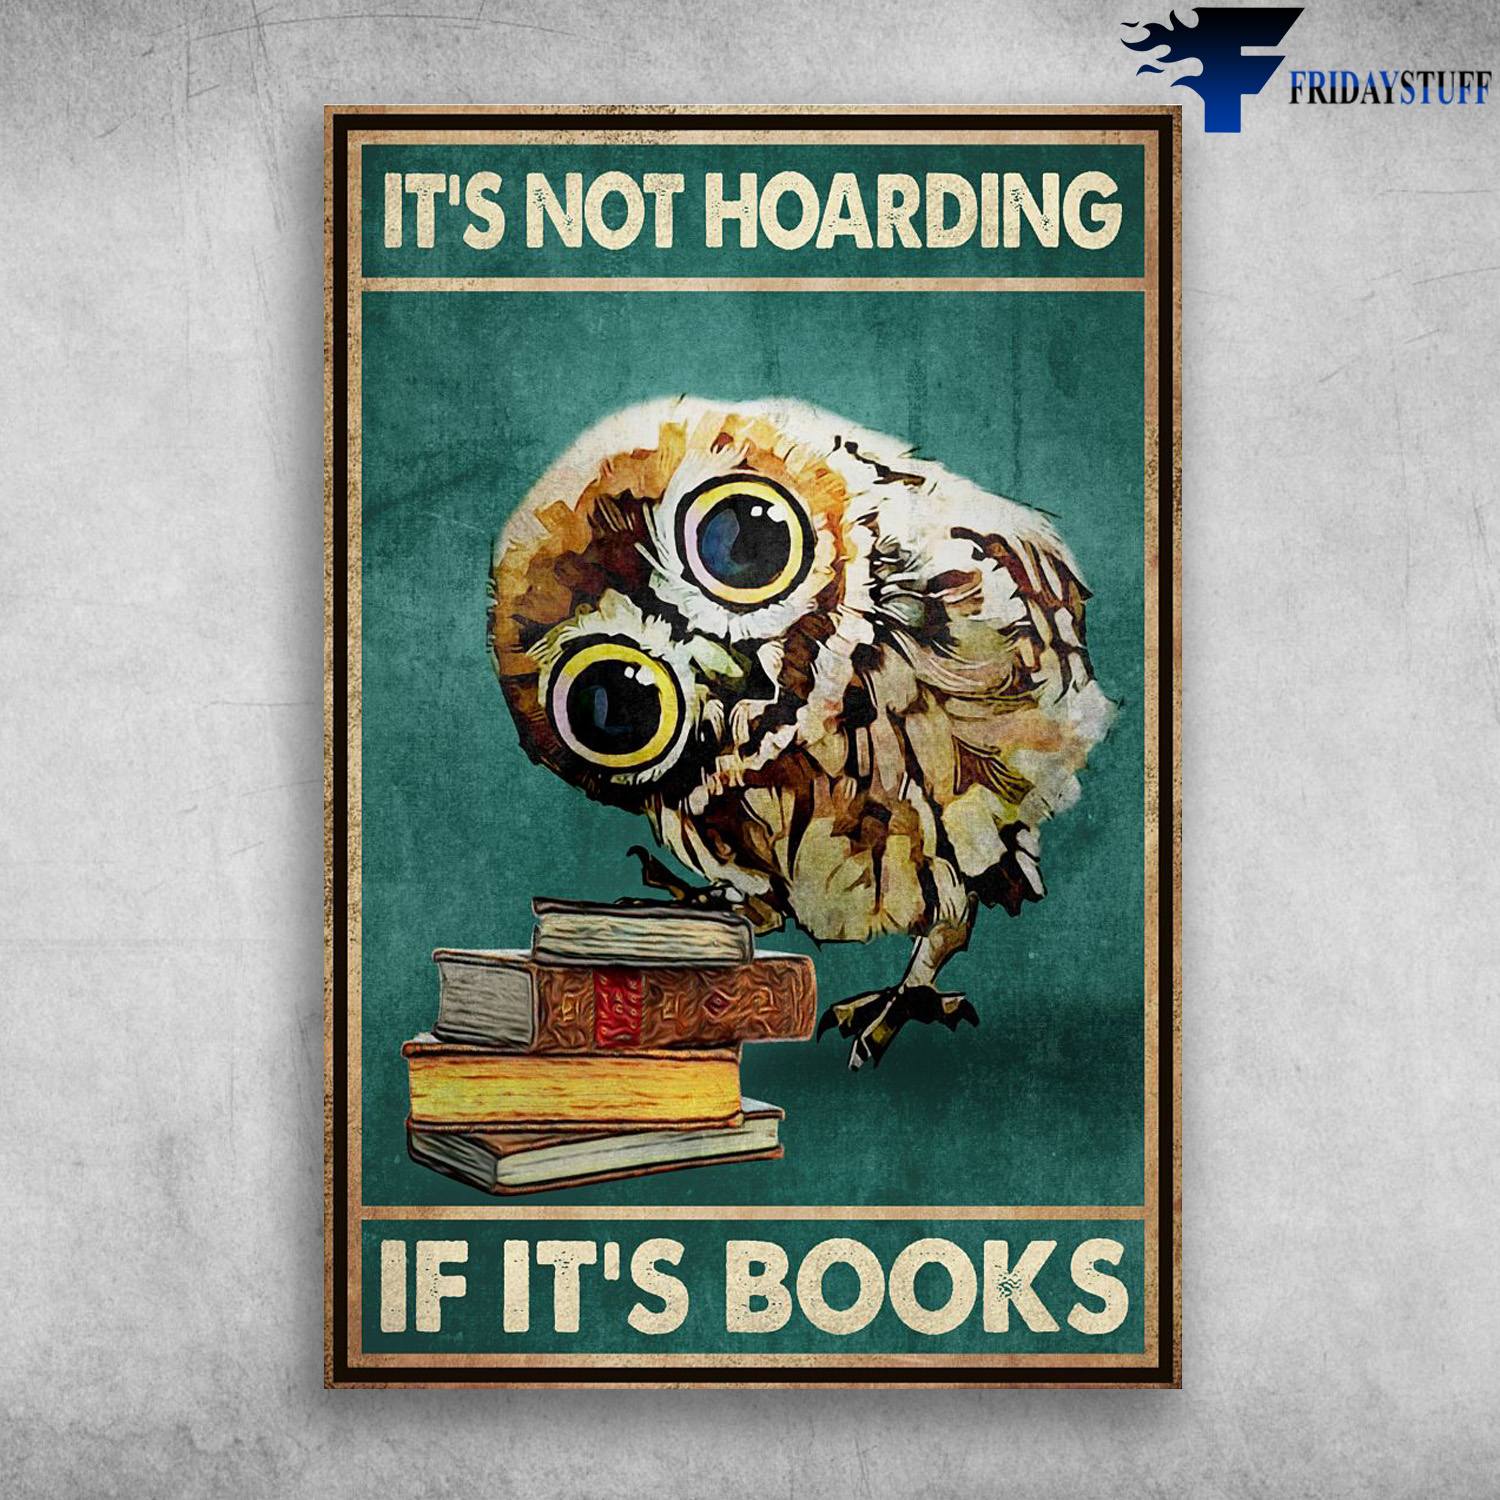 The Cute Owl Reading Books - It's Not Hoarding, If It's Books